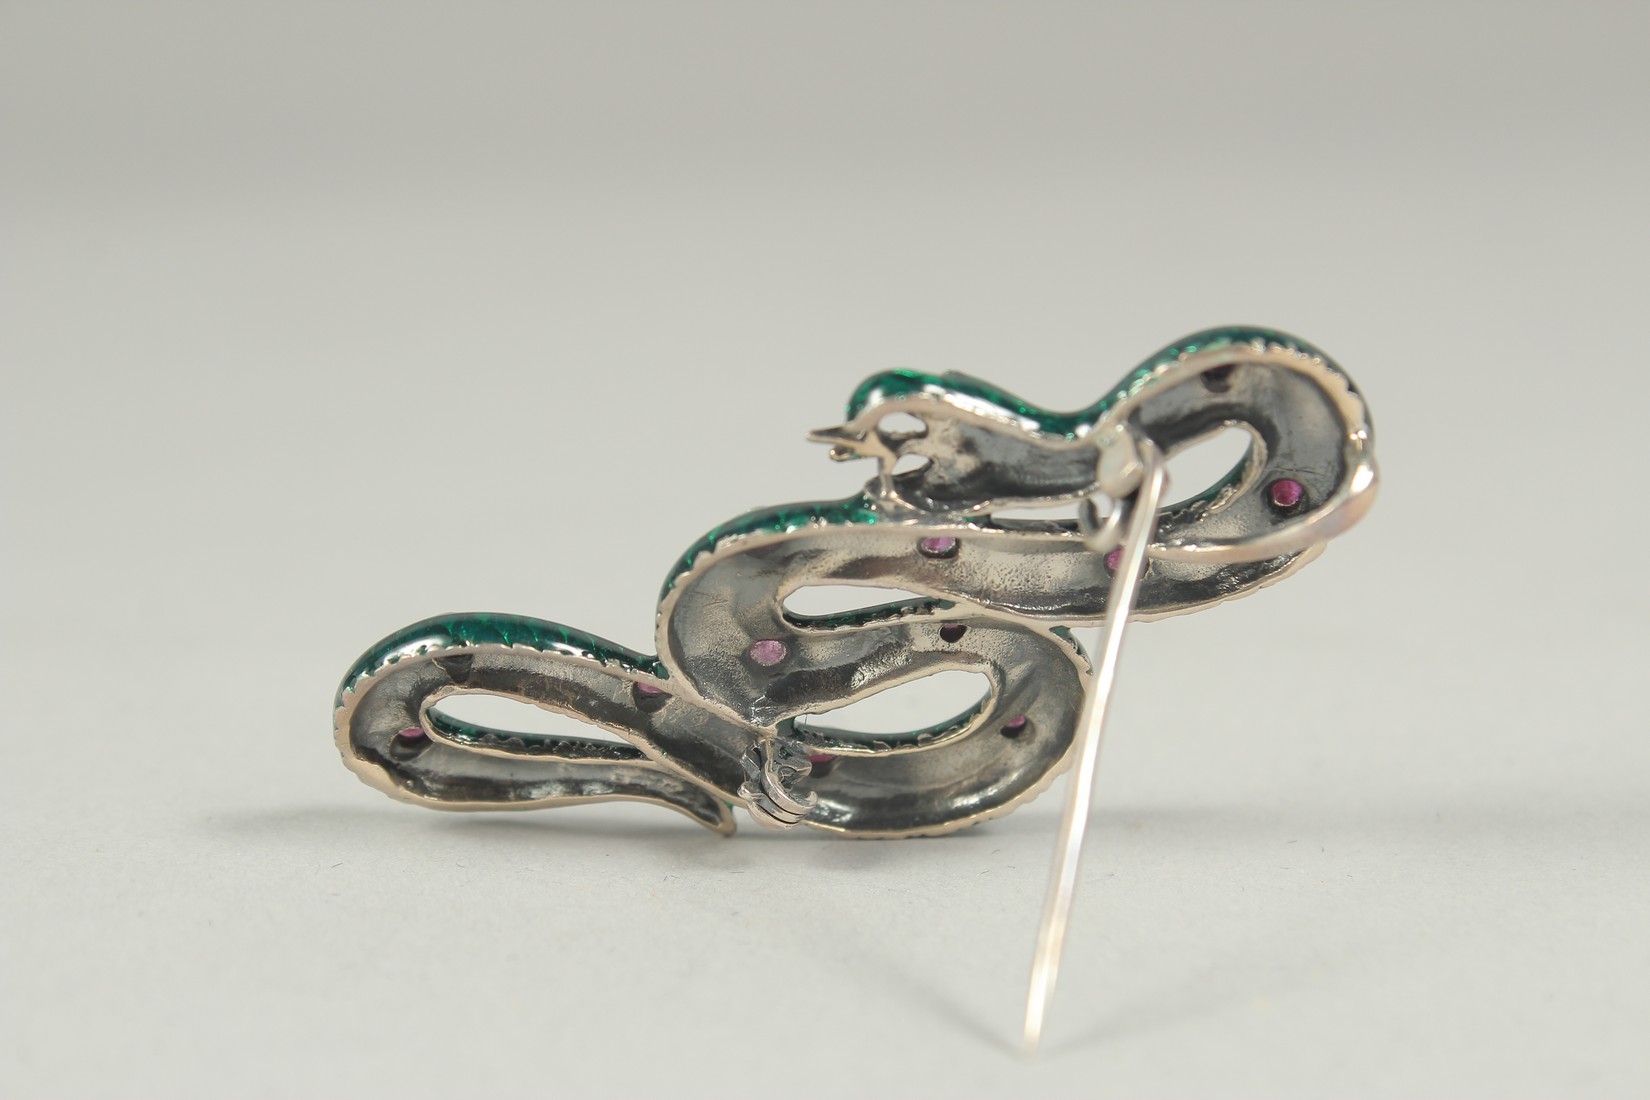 A silver ruby and enamel snake brooch or pendant in a box. - Image 2 of 2